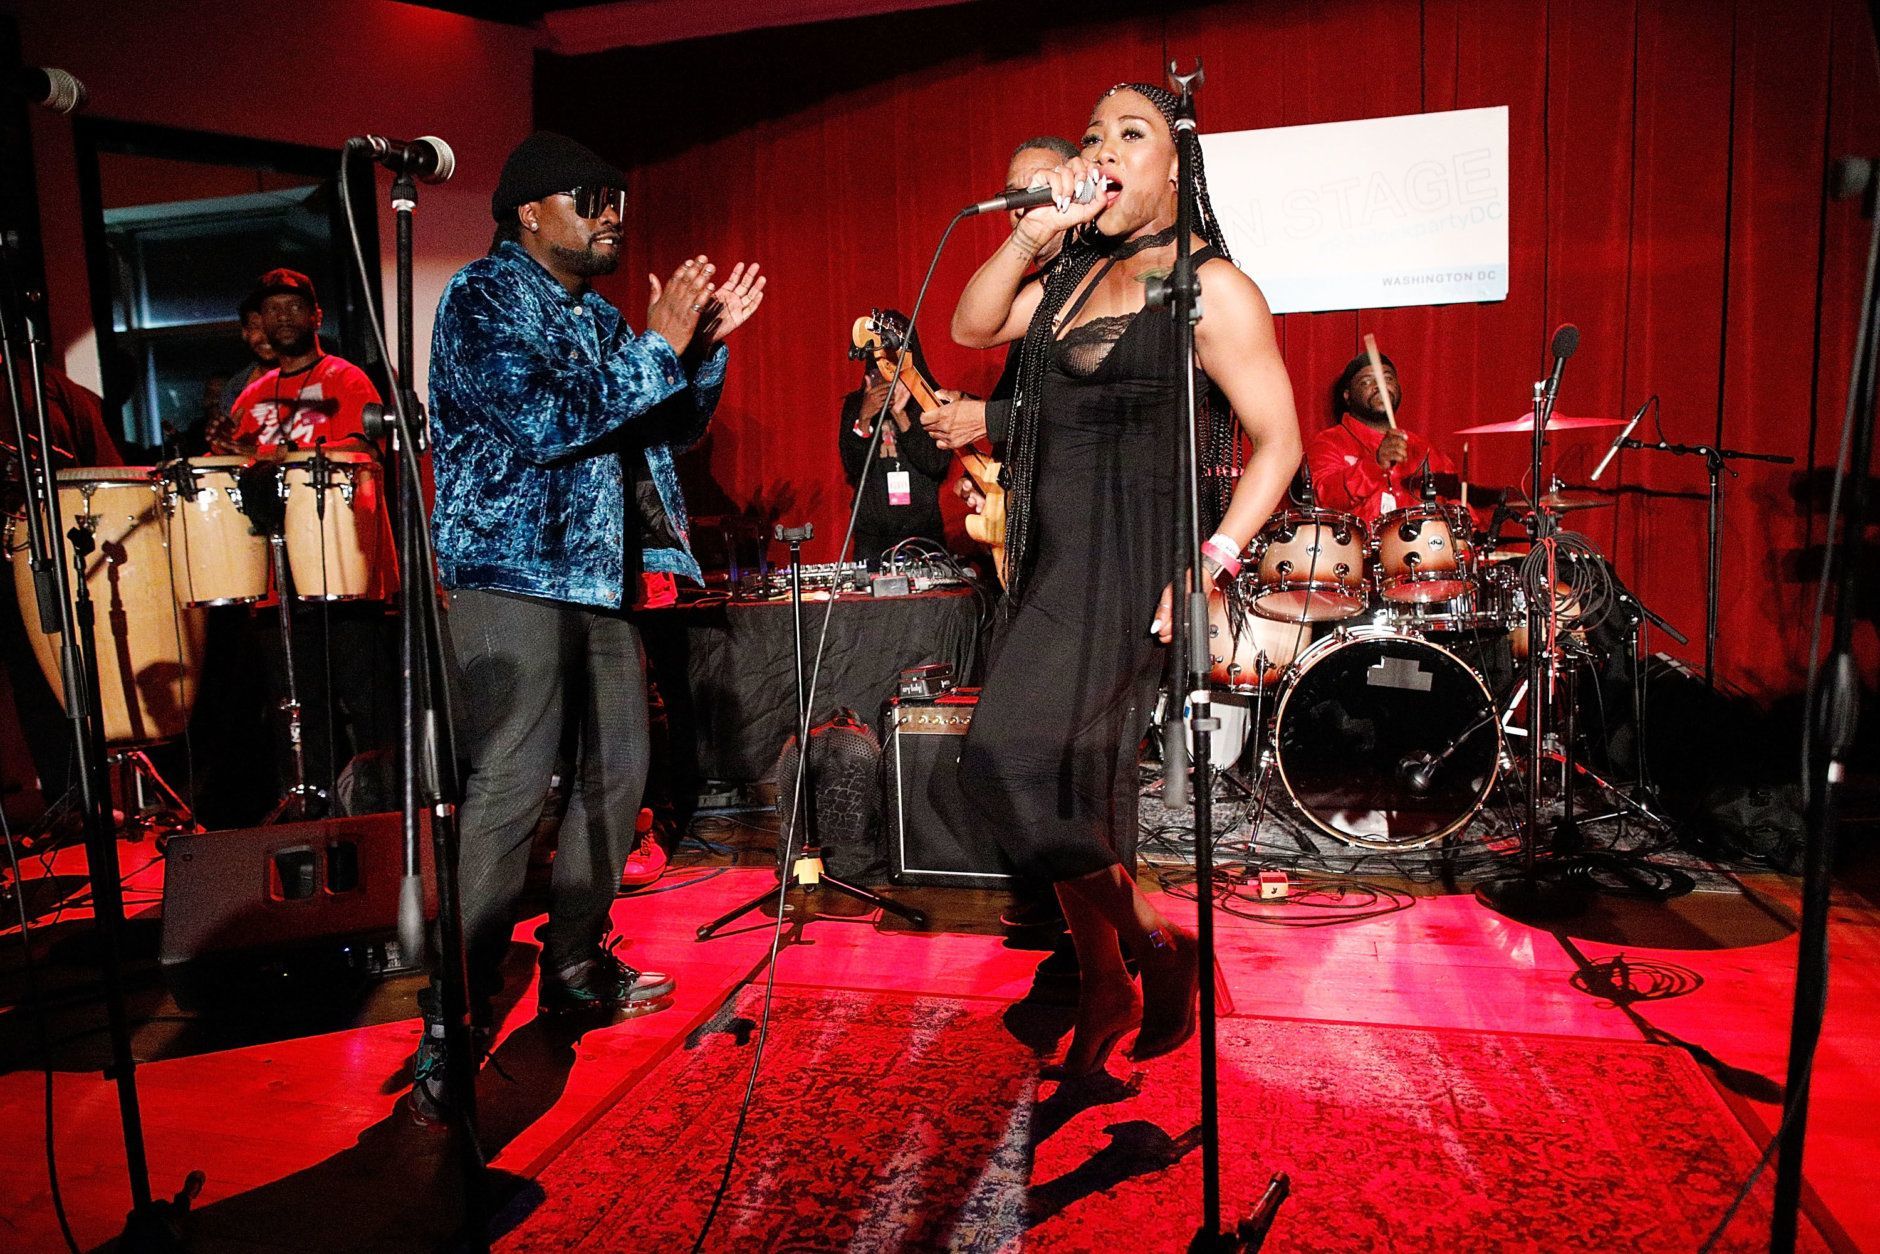 Wale and Rare Essence perform at the WDC Chapter Block Party at City Winery DC on May 10, 2019 in Washington, DC.